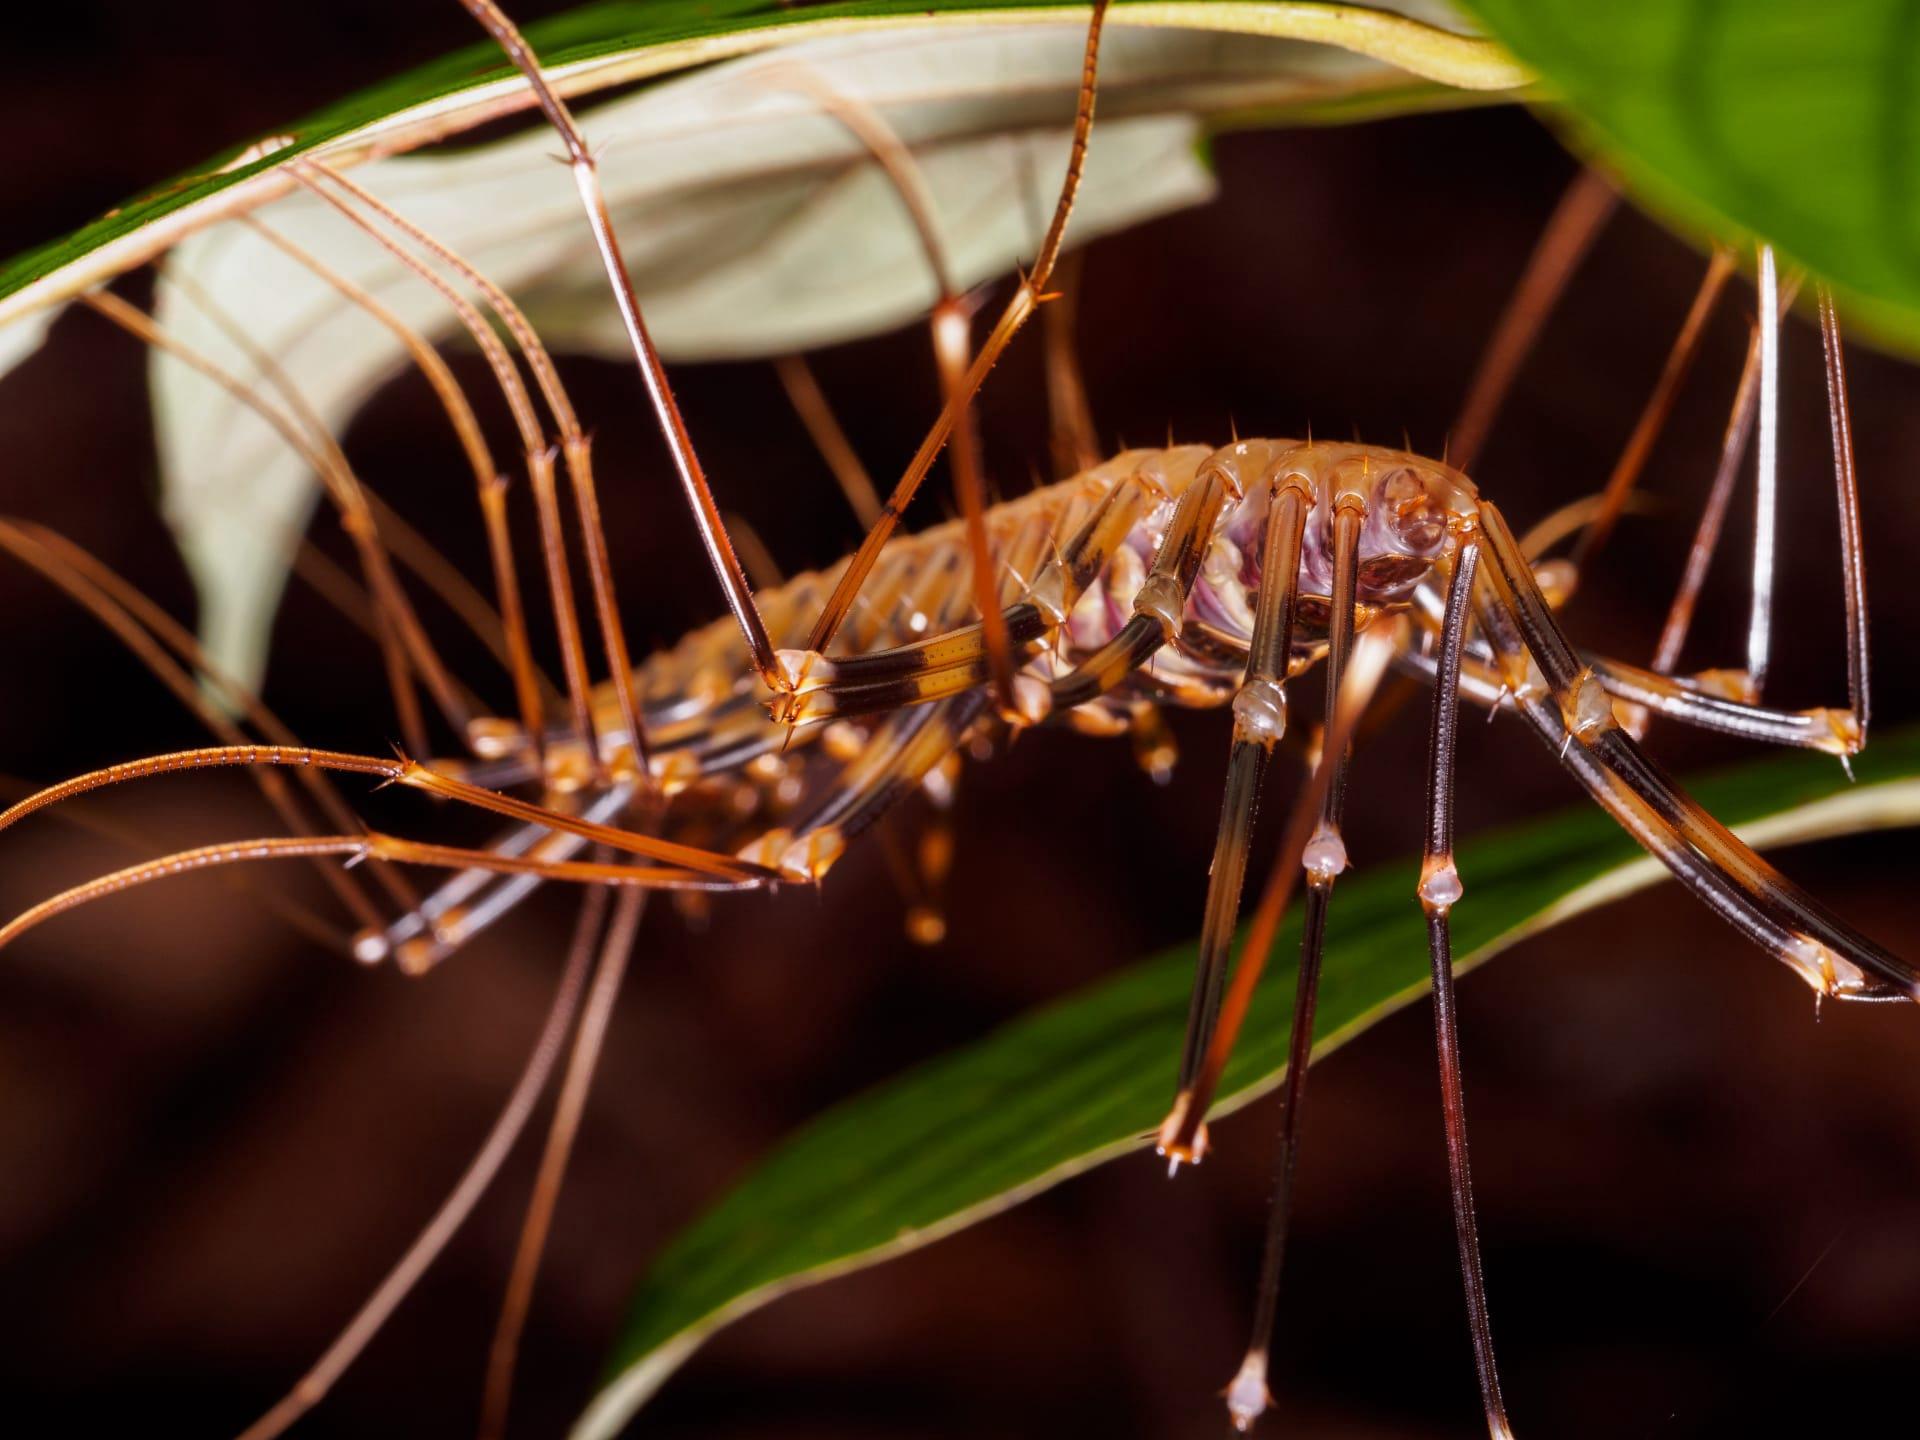 House centipede pictures